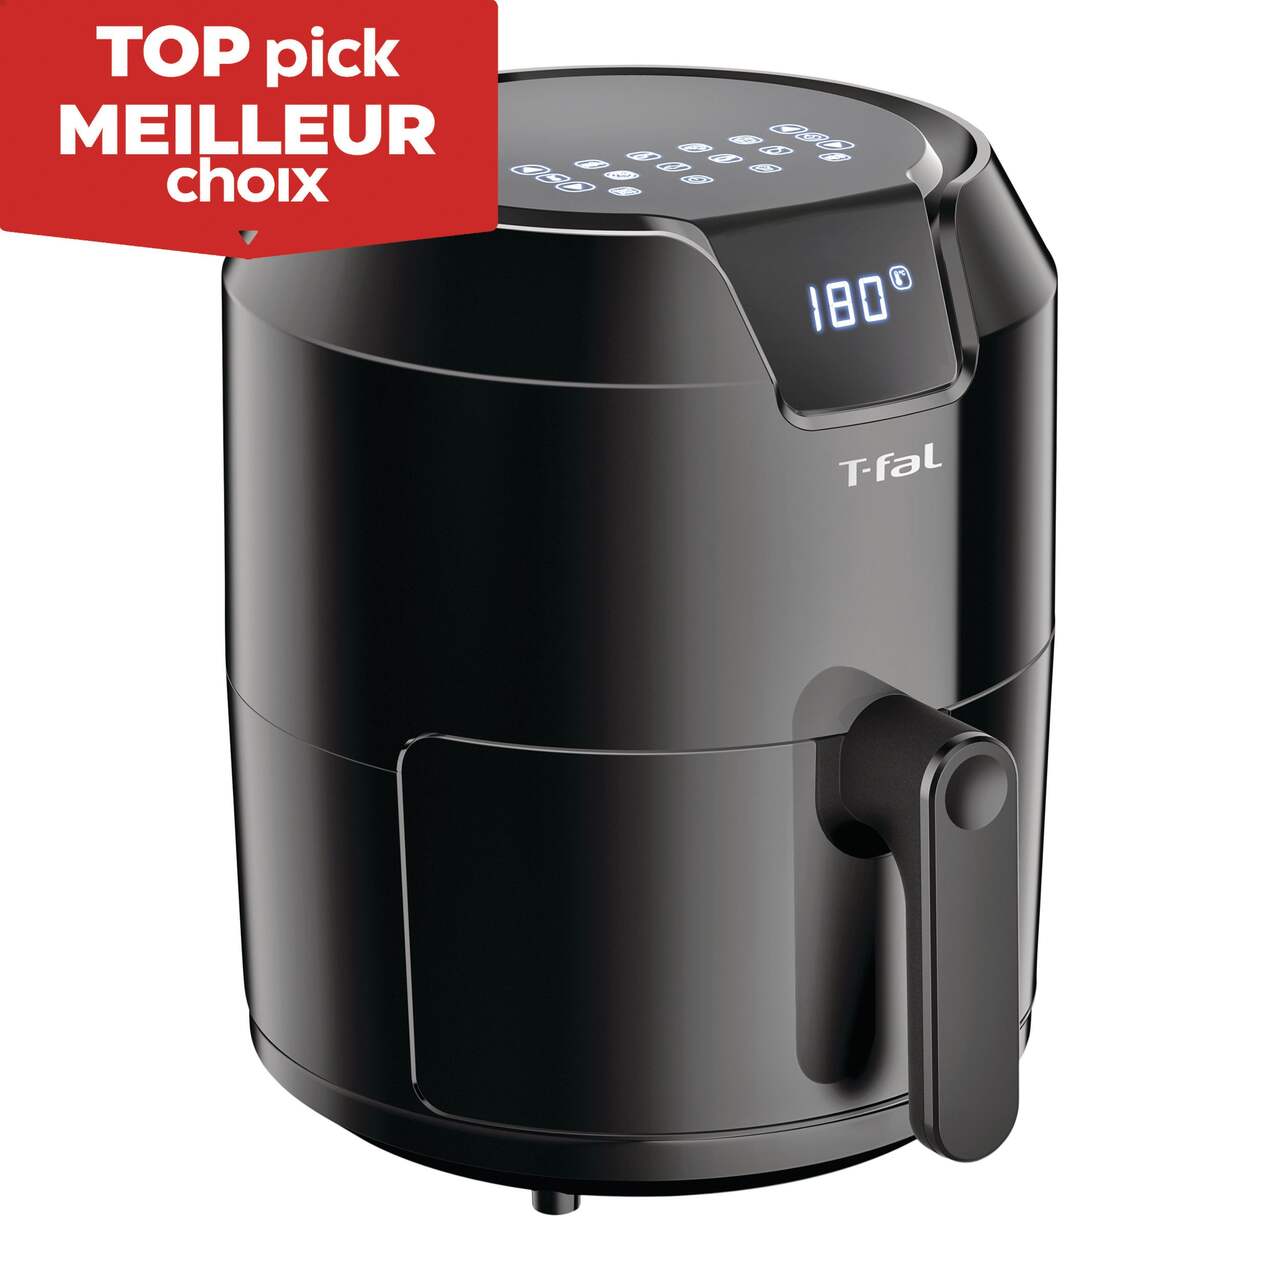 https://media-www.canadiantire.ca/product/living/kitchen/kitchen-appliances/0430944/t-fal-easy-fry-xl-digital-air-fryer-6ddd7424-1a08-476a-beab-169f79a397d5-jpgrendition.jpg?imdensity=1&imwidth=640&impolicy=mZoom